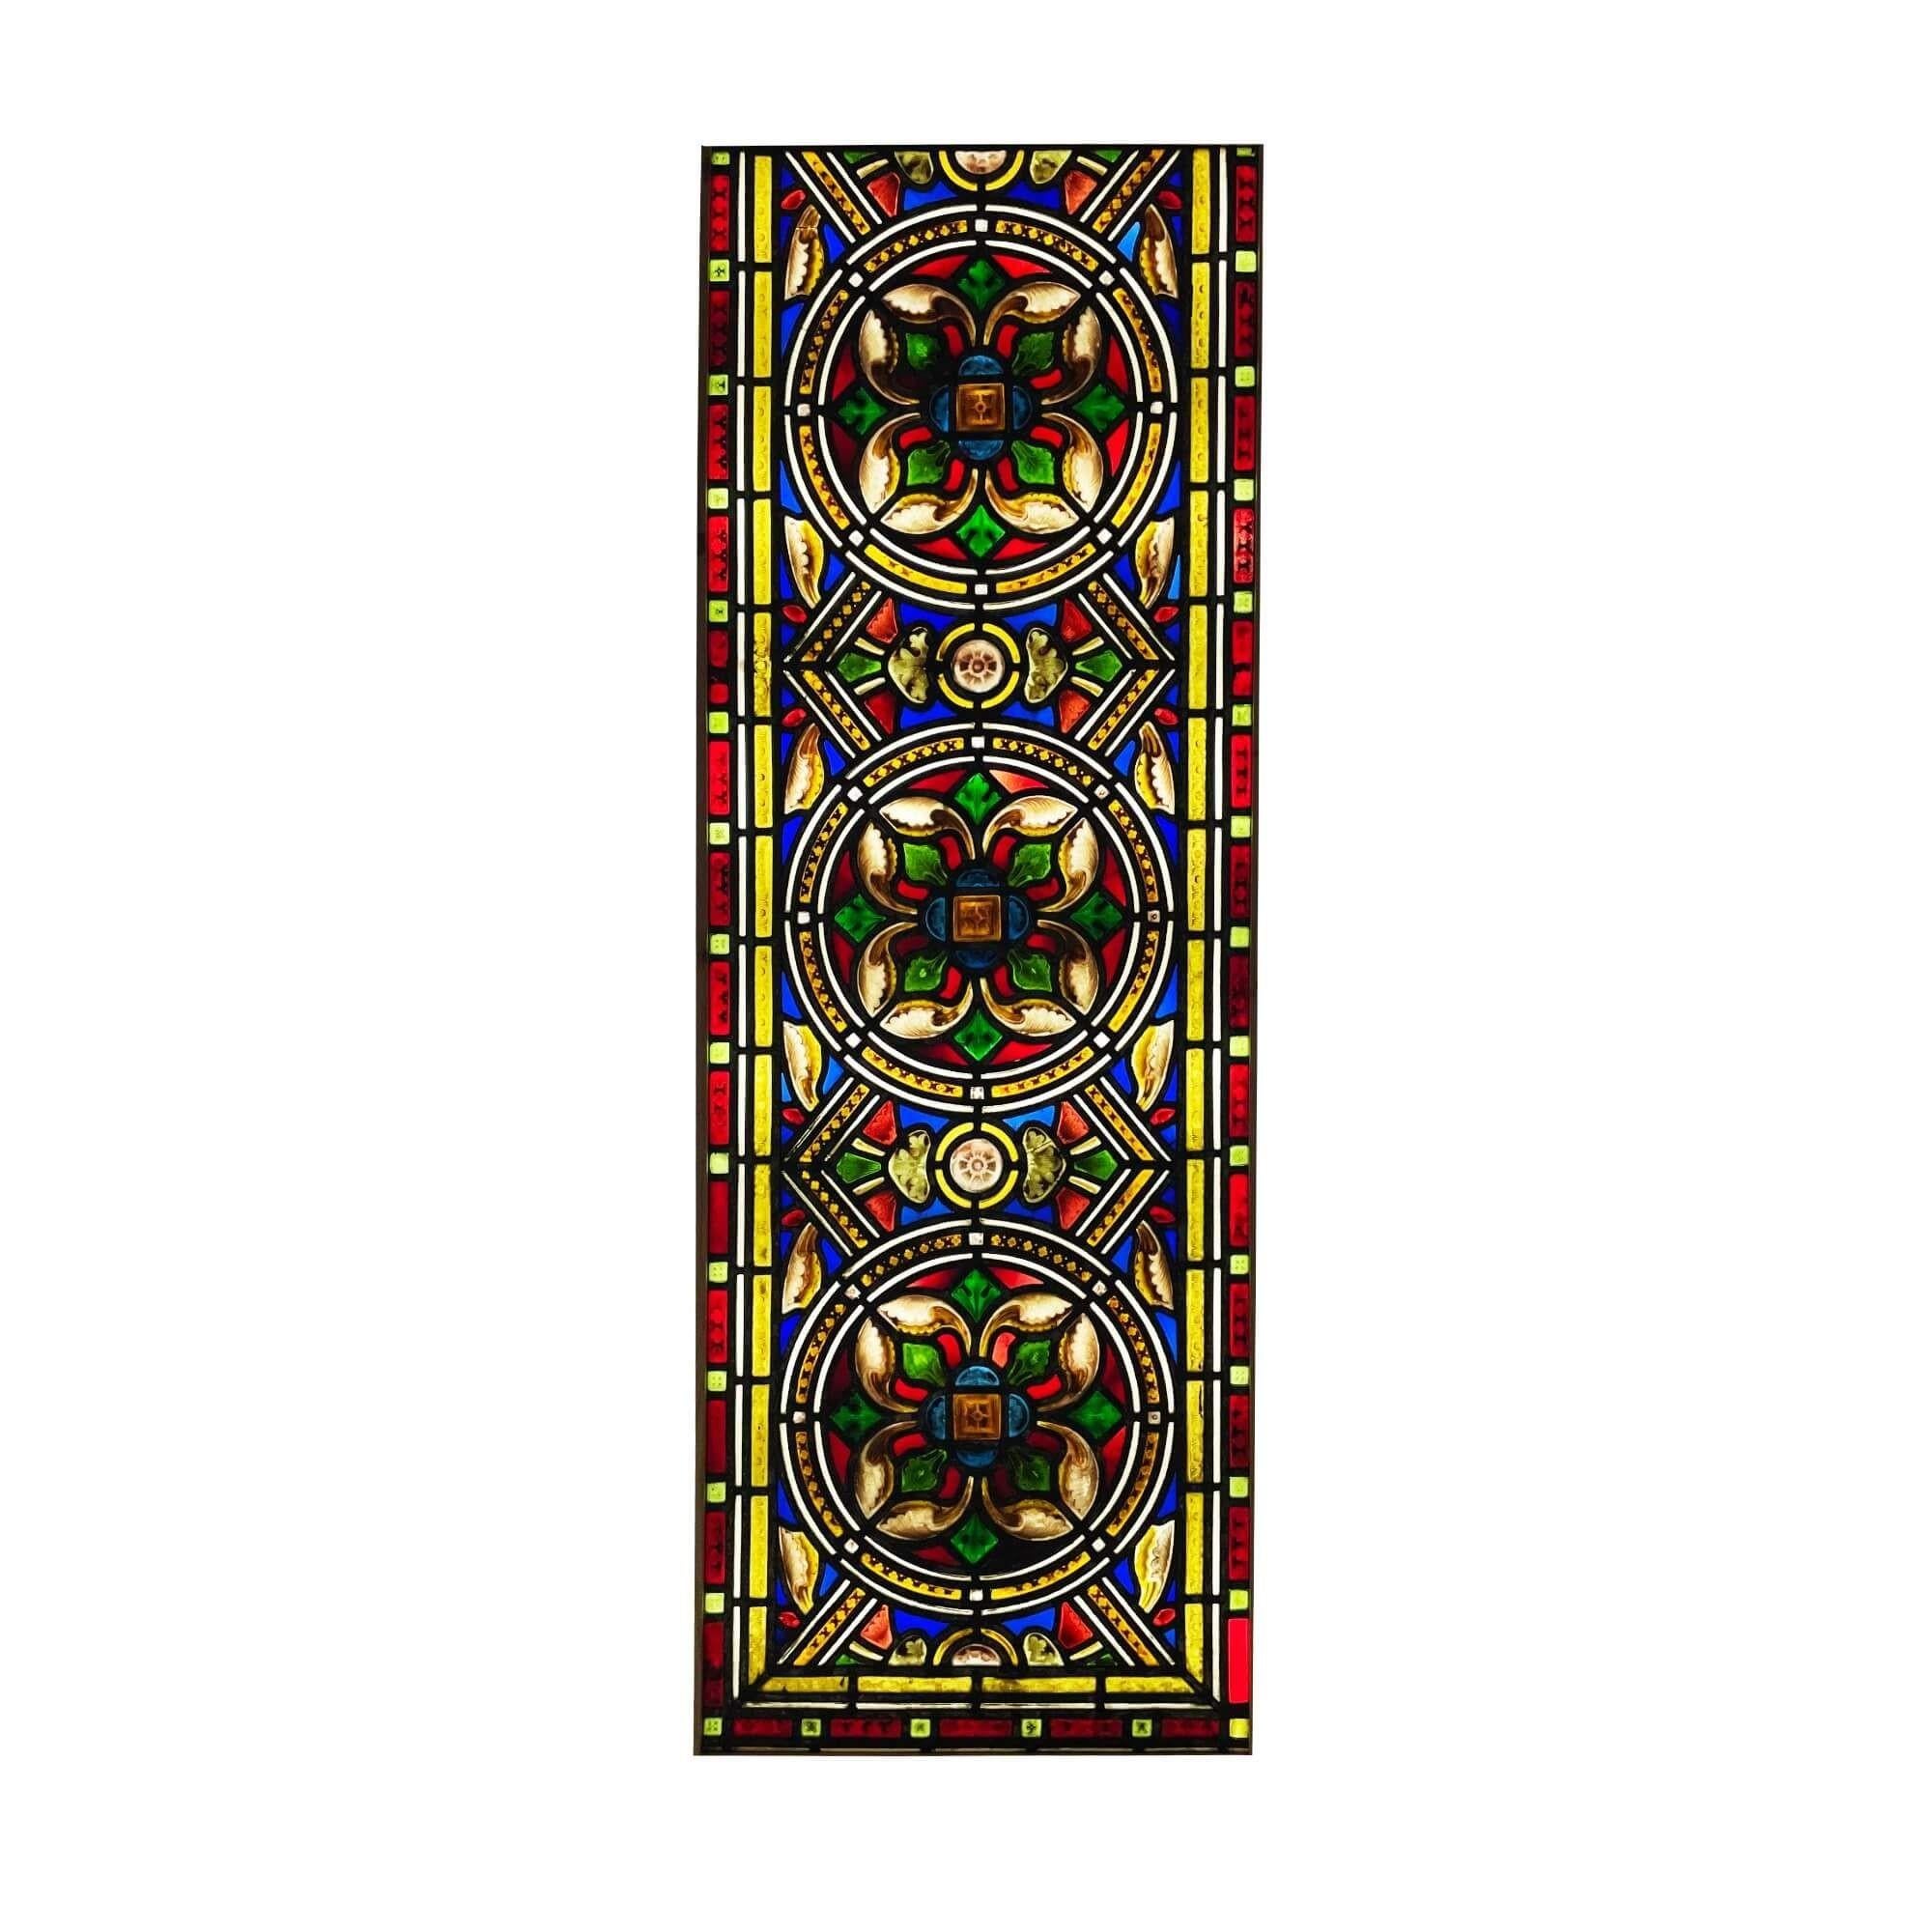 A large antique Medieval style late 19th century stained glass window, originally from a church in northern England. Three hand painted detailed flowers, thought to be a stylised Tudor Rose design, sit at the heart of this piece. It incorporates